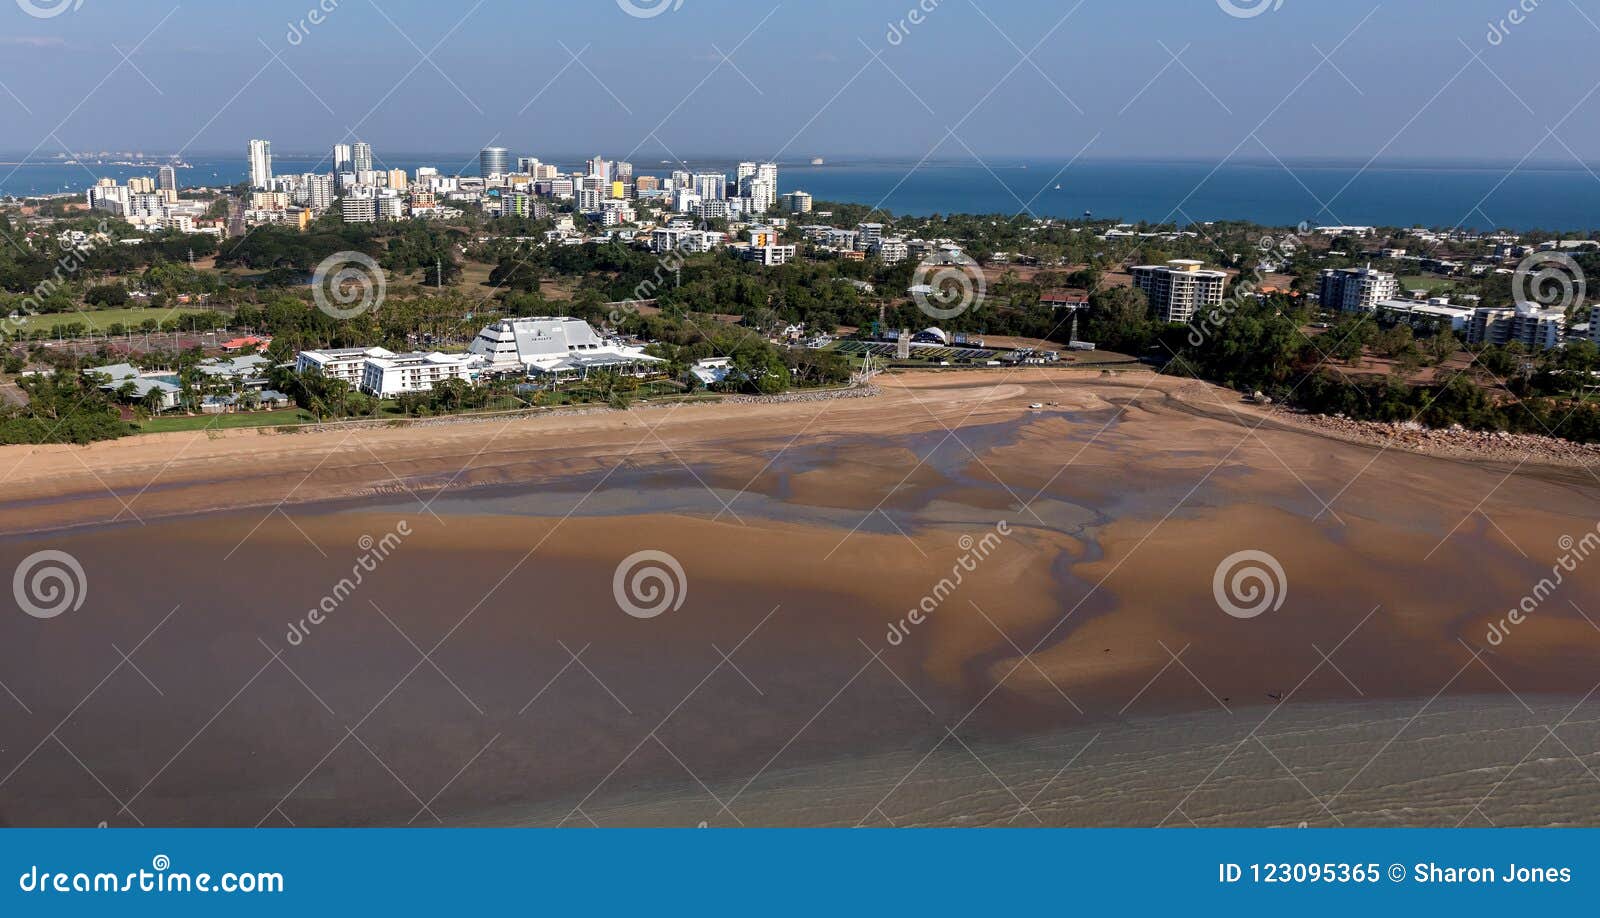 an aerial photo of darwin, the capital city of the northern territory of australia.